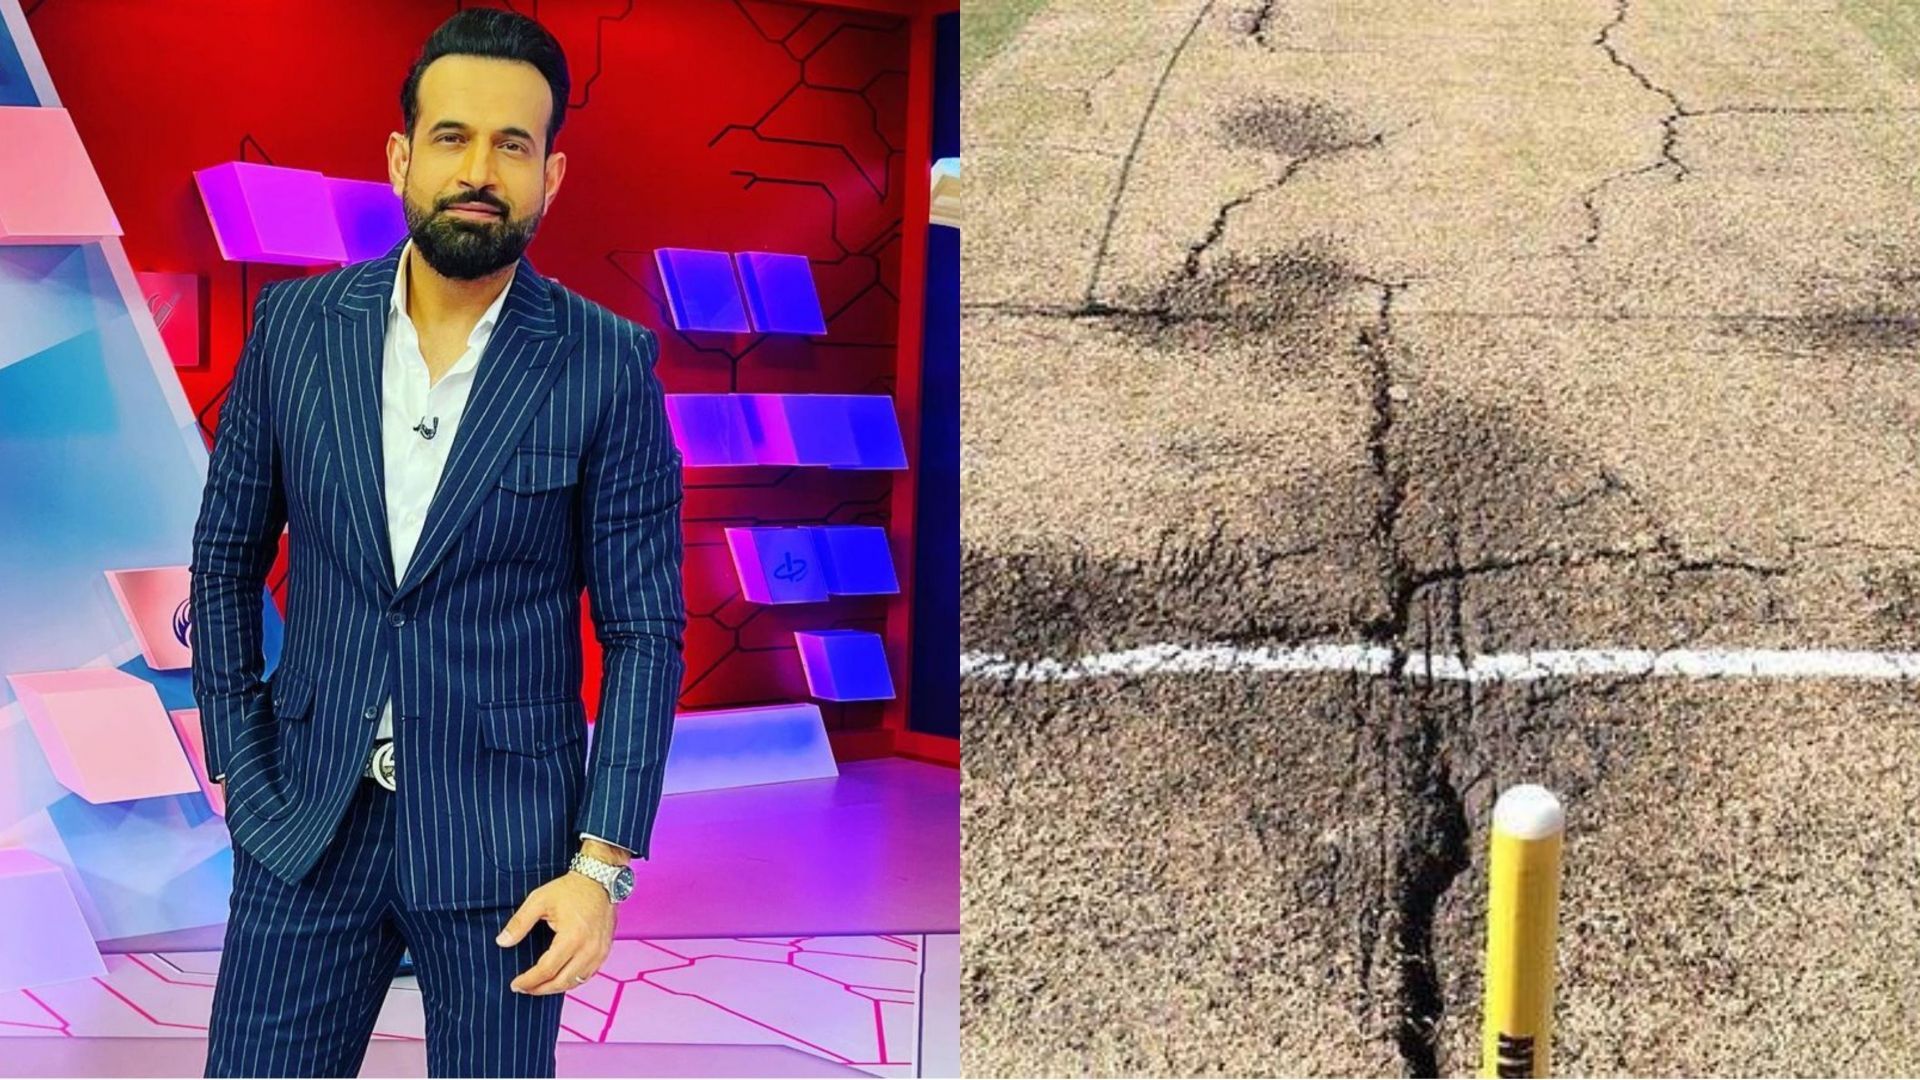 Irfan Pathan gave his opinion on the pitch update (Image: Twitter)